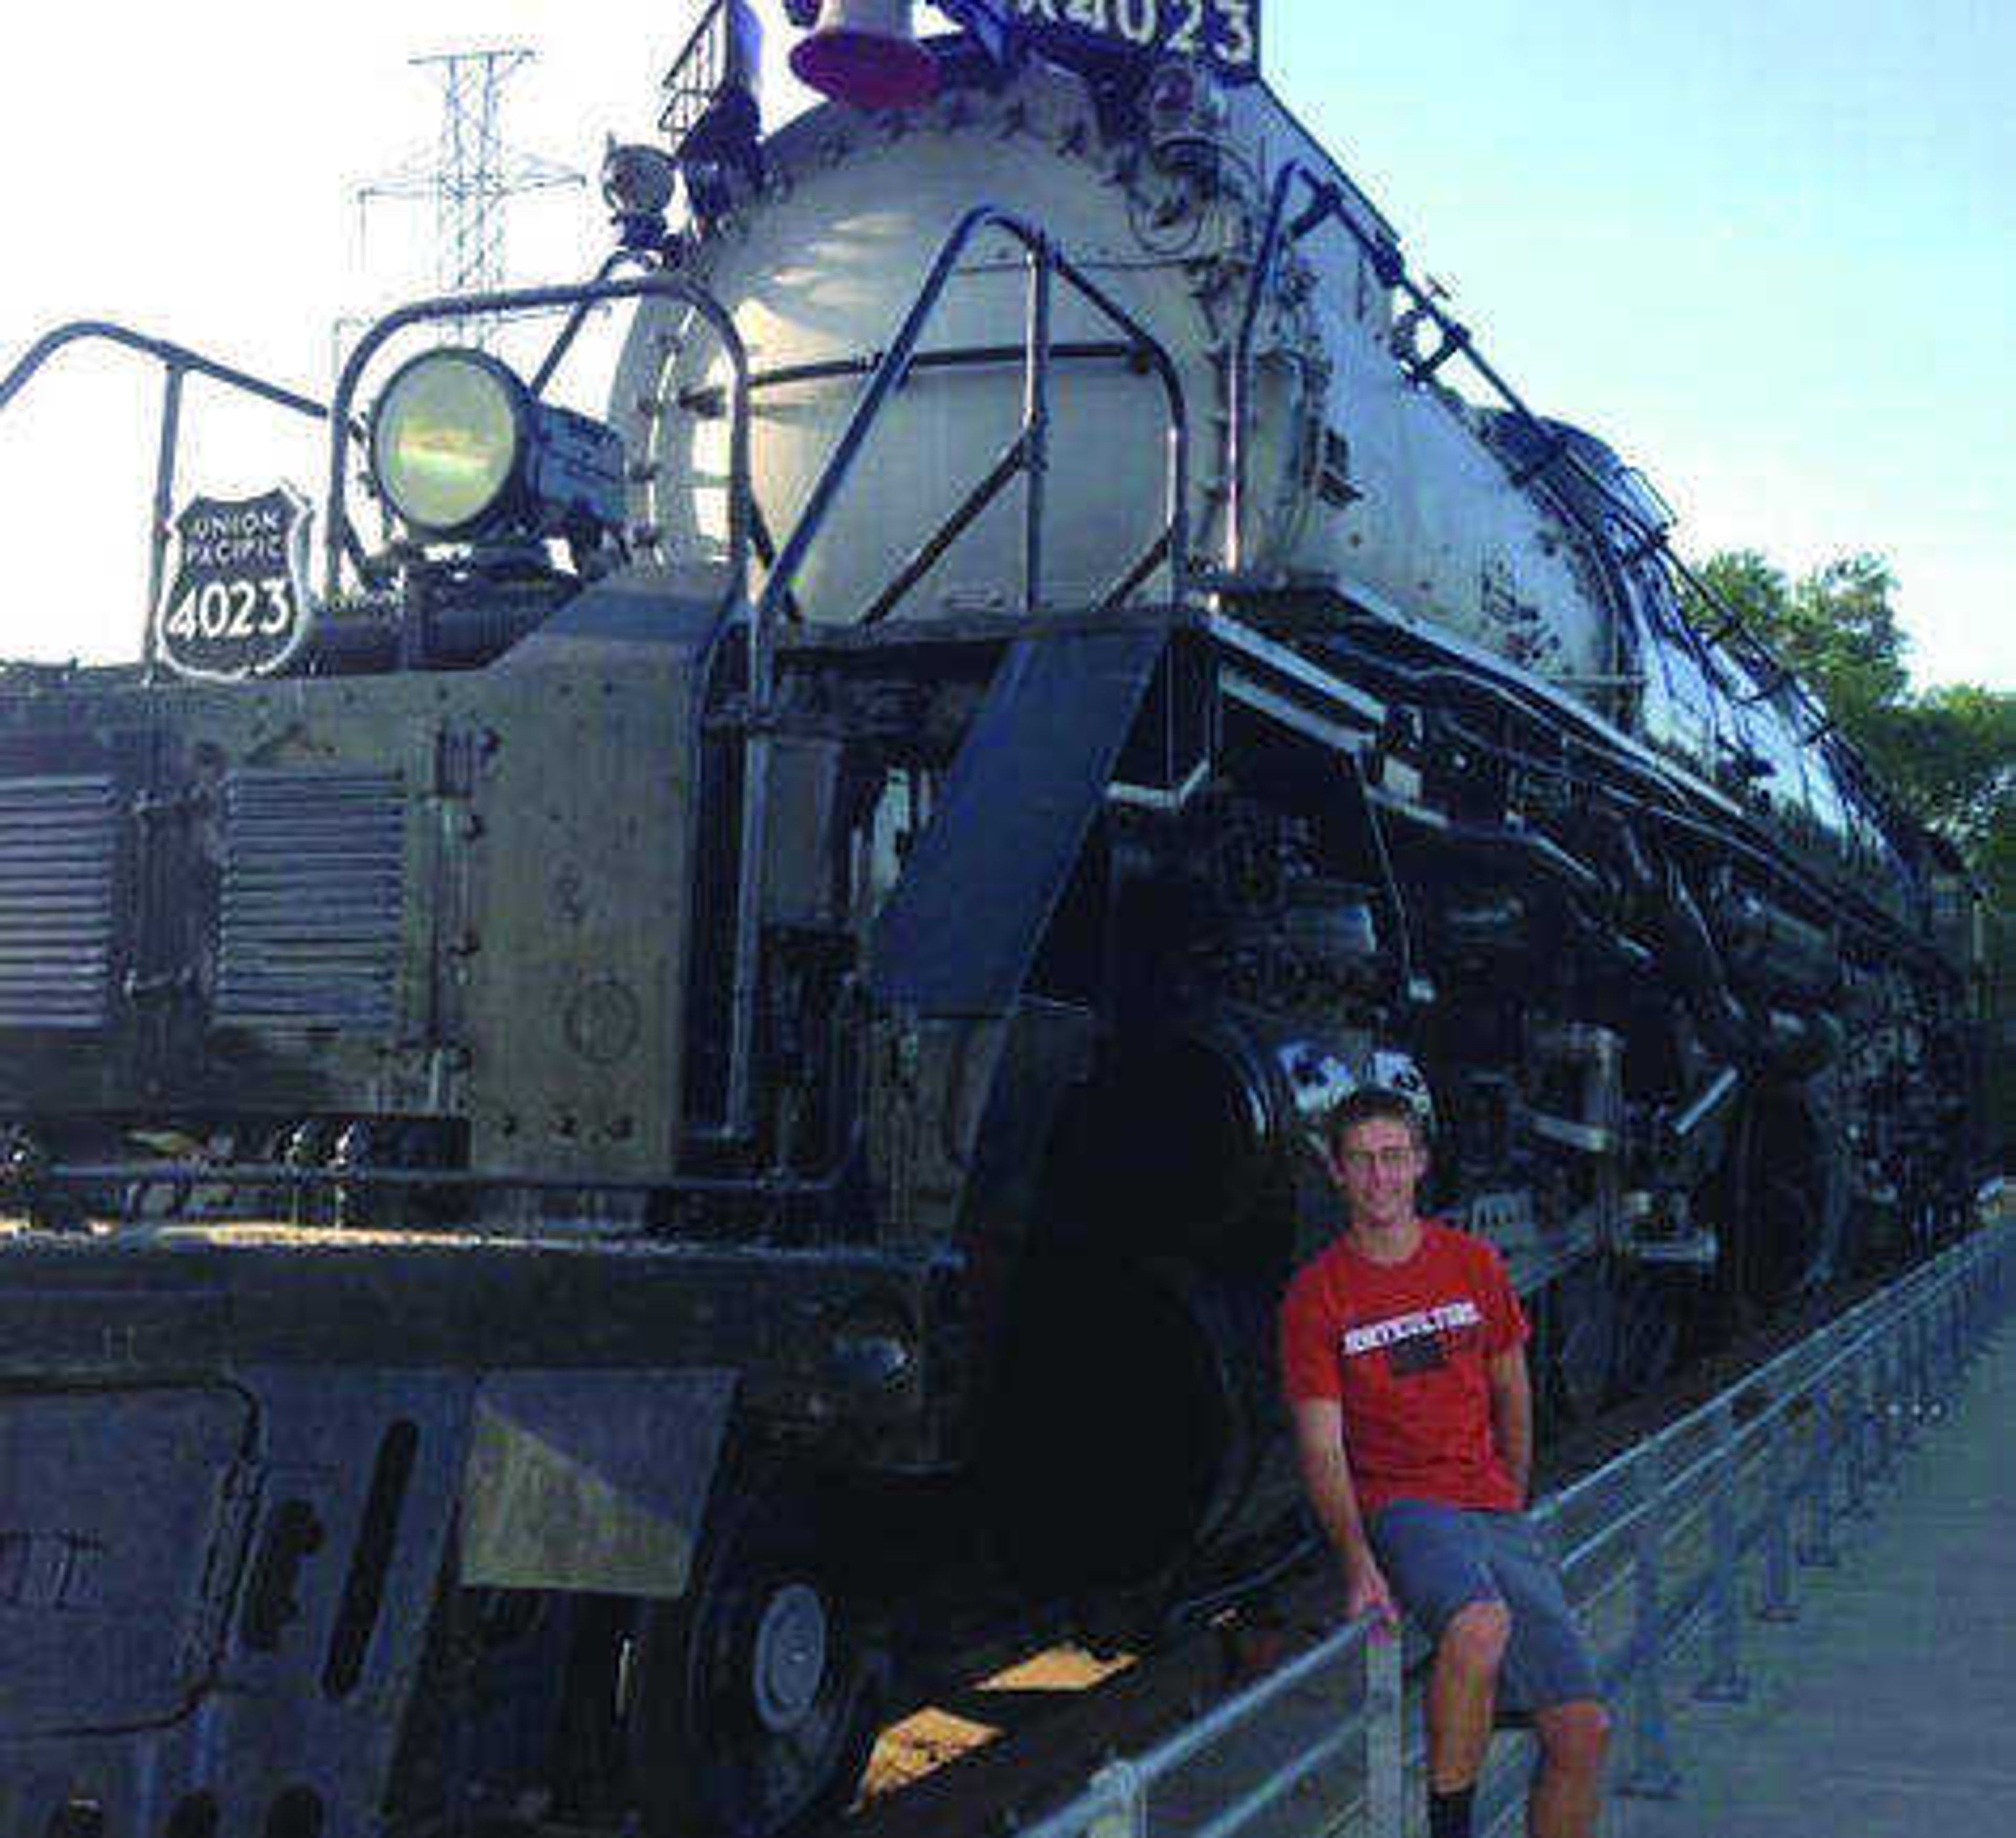 Ethan Hochstein interned for Union Pacific Corp. last summer in Omaha, Nebraska. Submitted photo